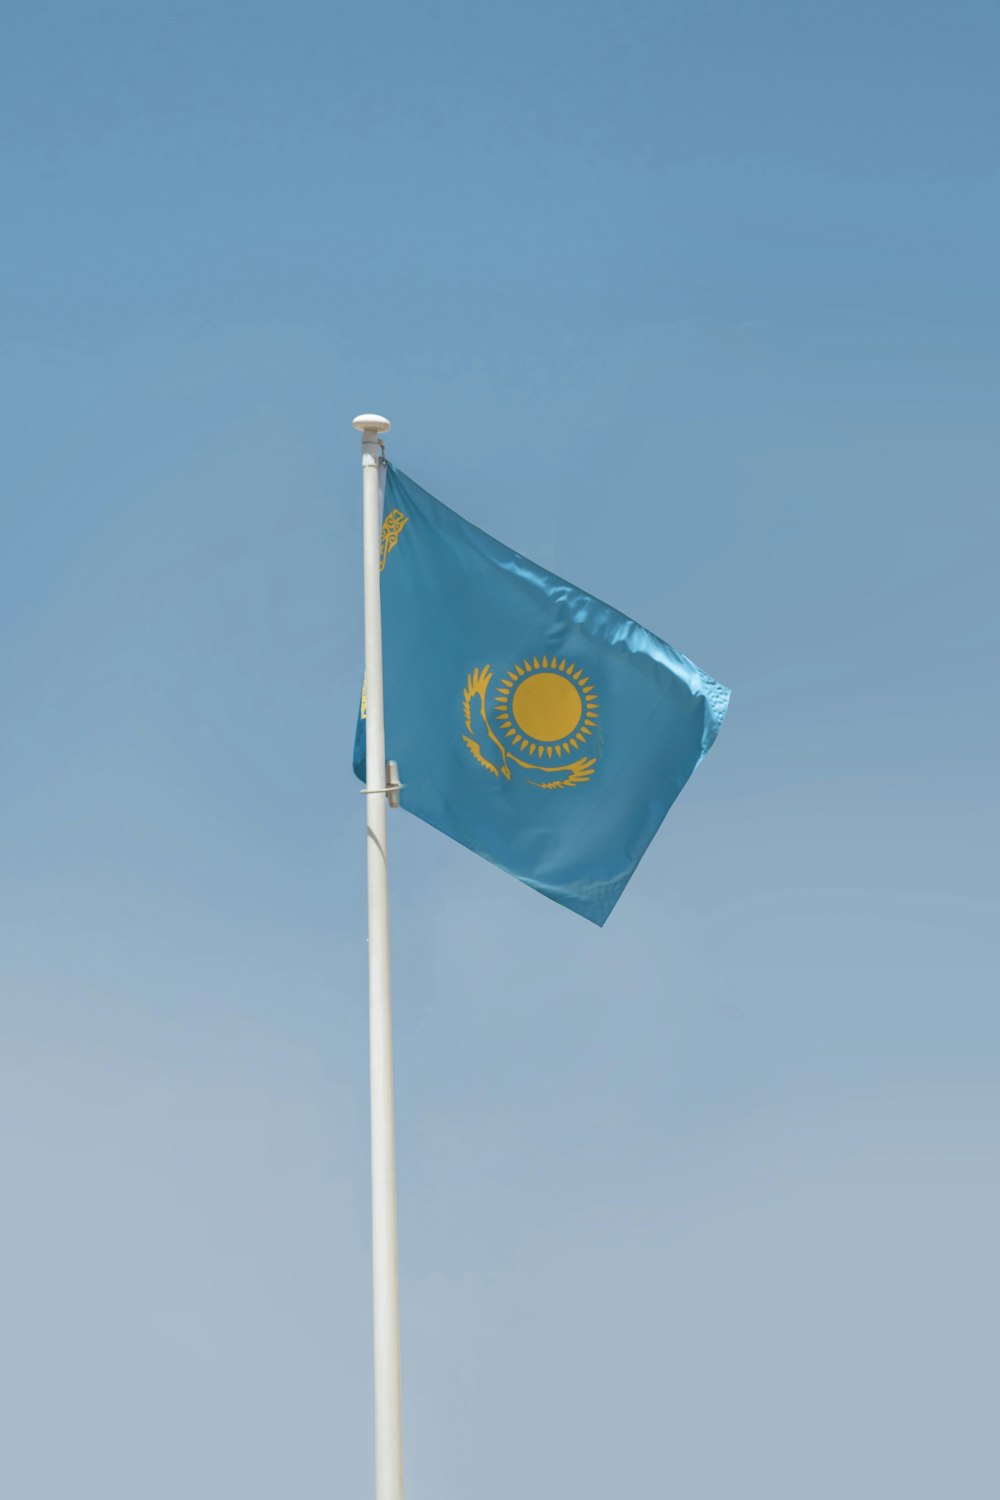 a blue and yellow flag